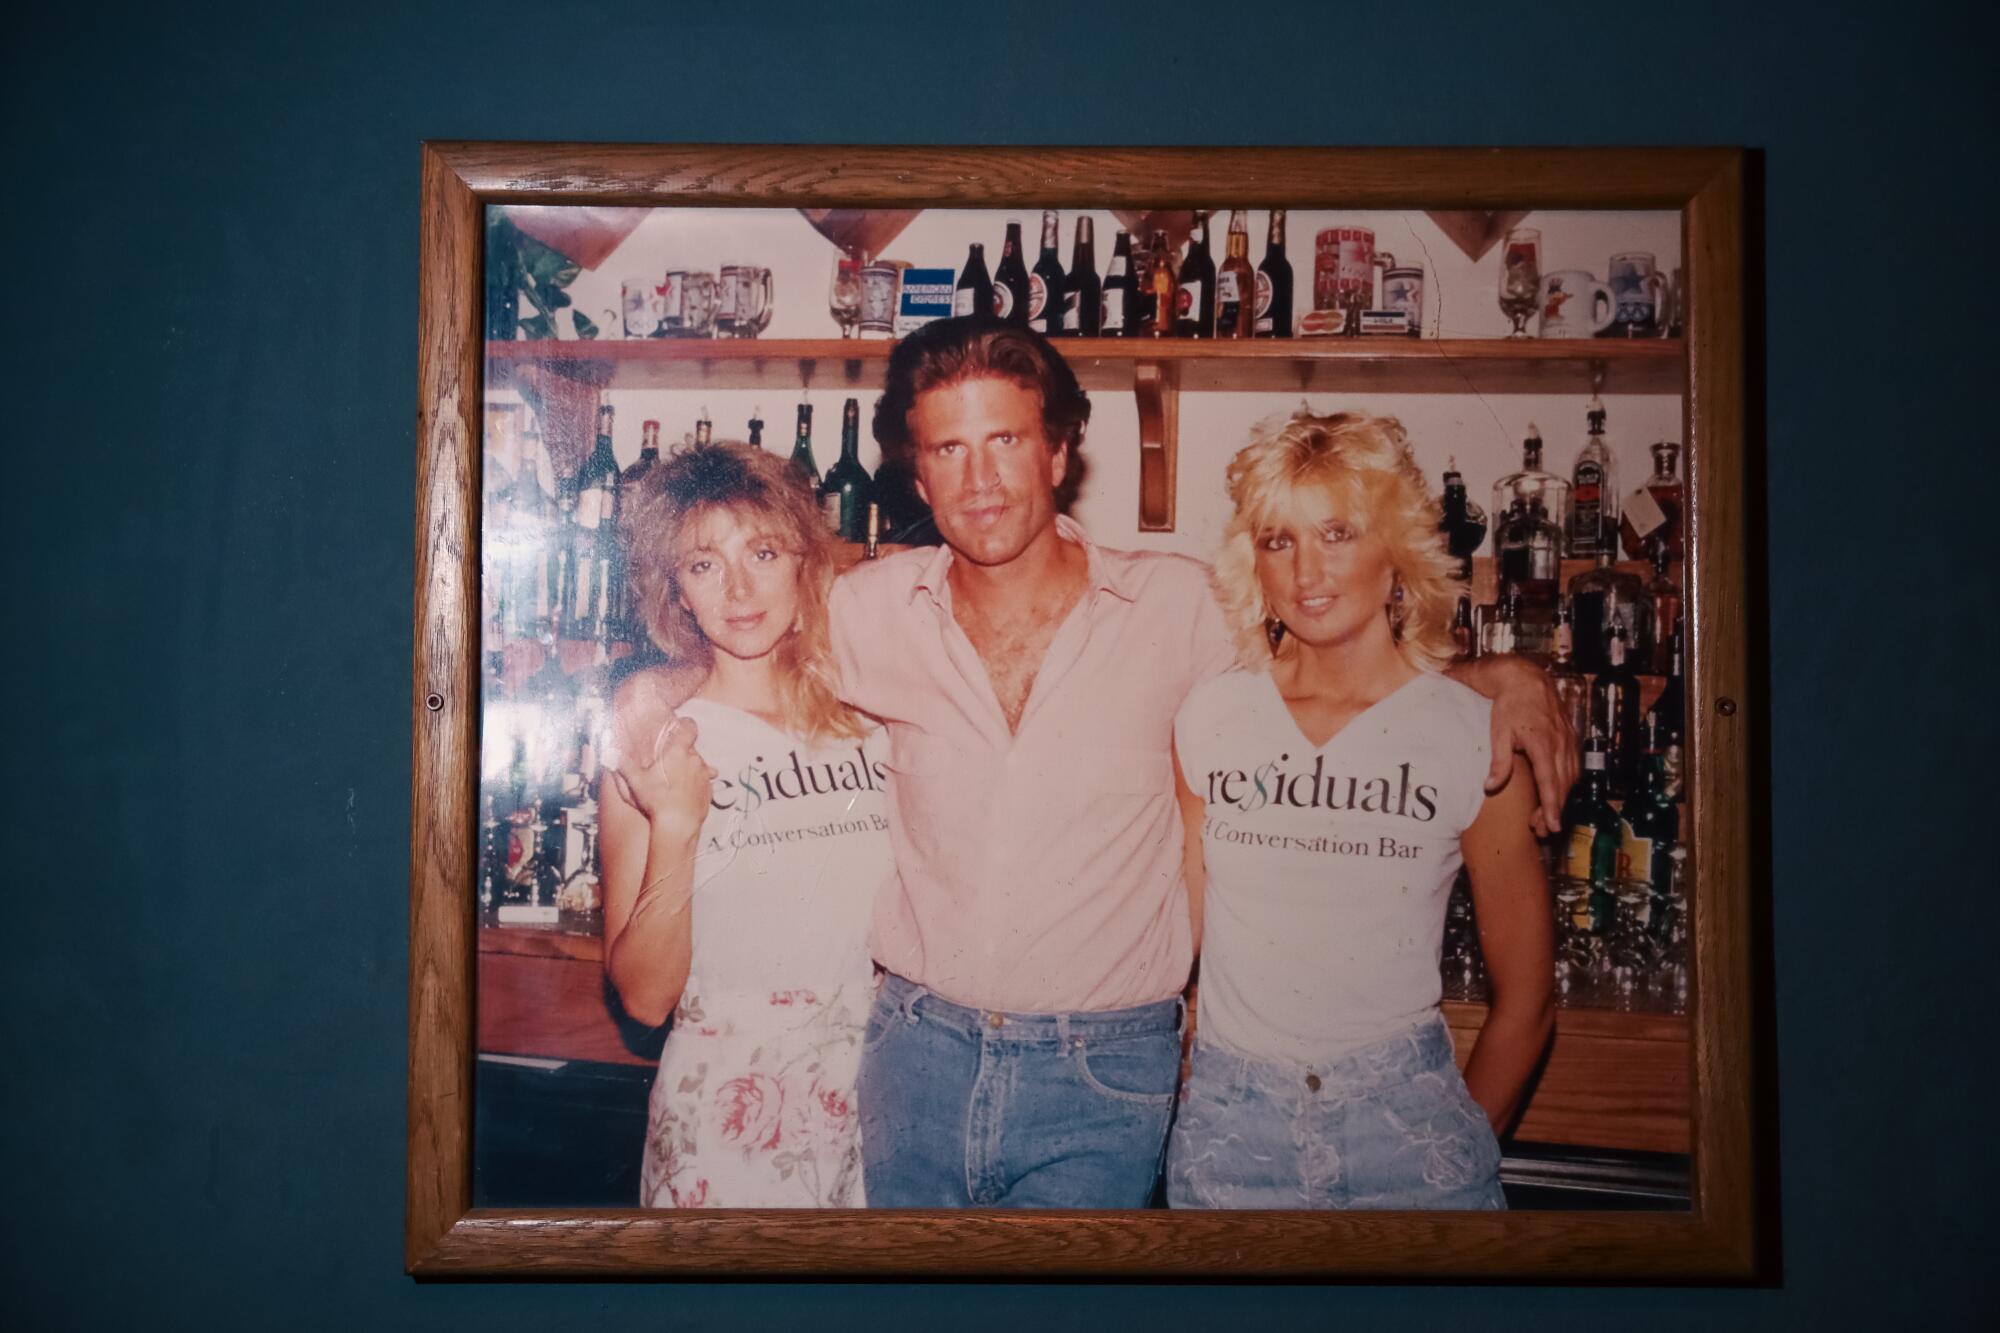 A photo on the wall at a bar called Residuals.